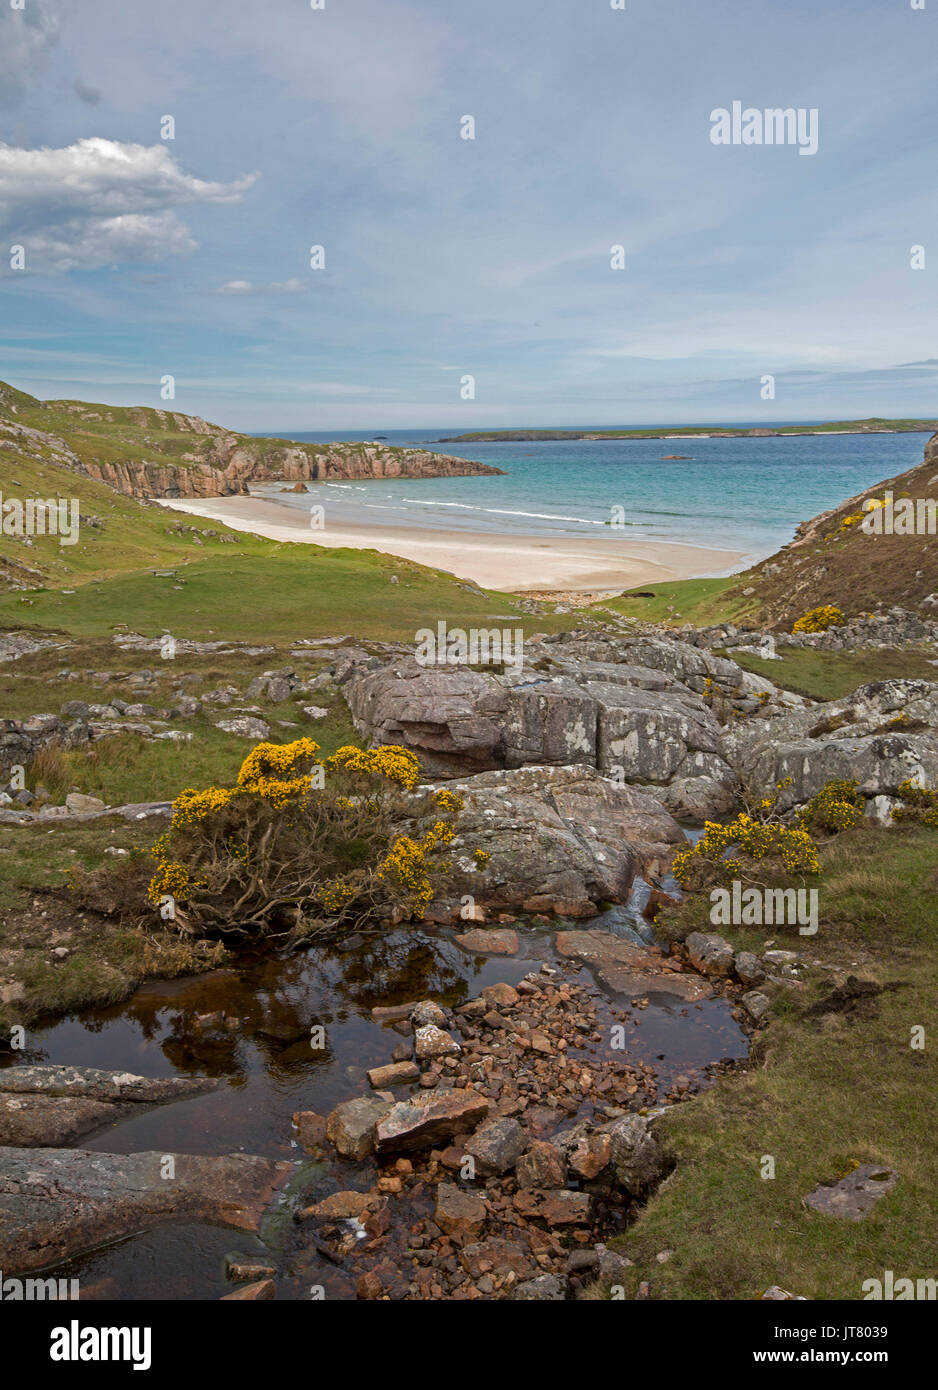 Coastal landscape with sandy beach in secluded rocky bay with foreground daubed with golden flowers of gorse under blue sky near Durness, Scotland Stock Photo